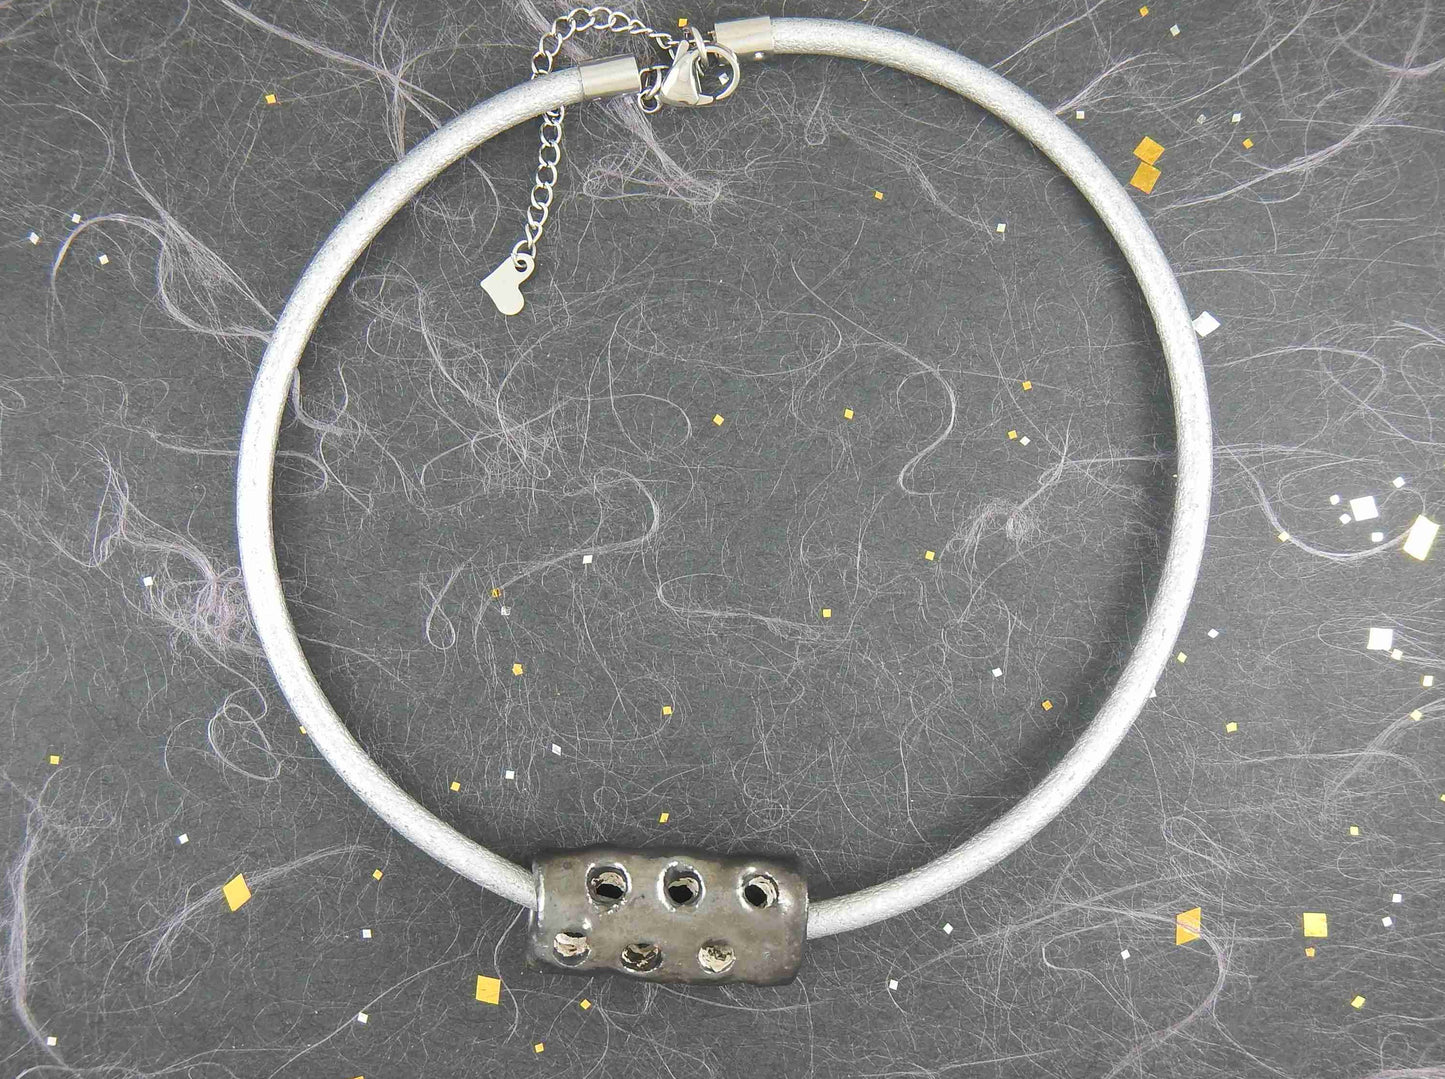 Choker necklace with black nickel ceramic cylinder handmade in Montreal, hole pattern, metallic silver leather cord, stainless steel clasp